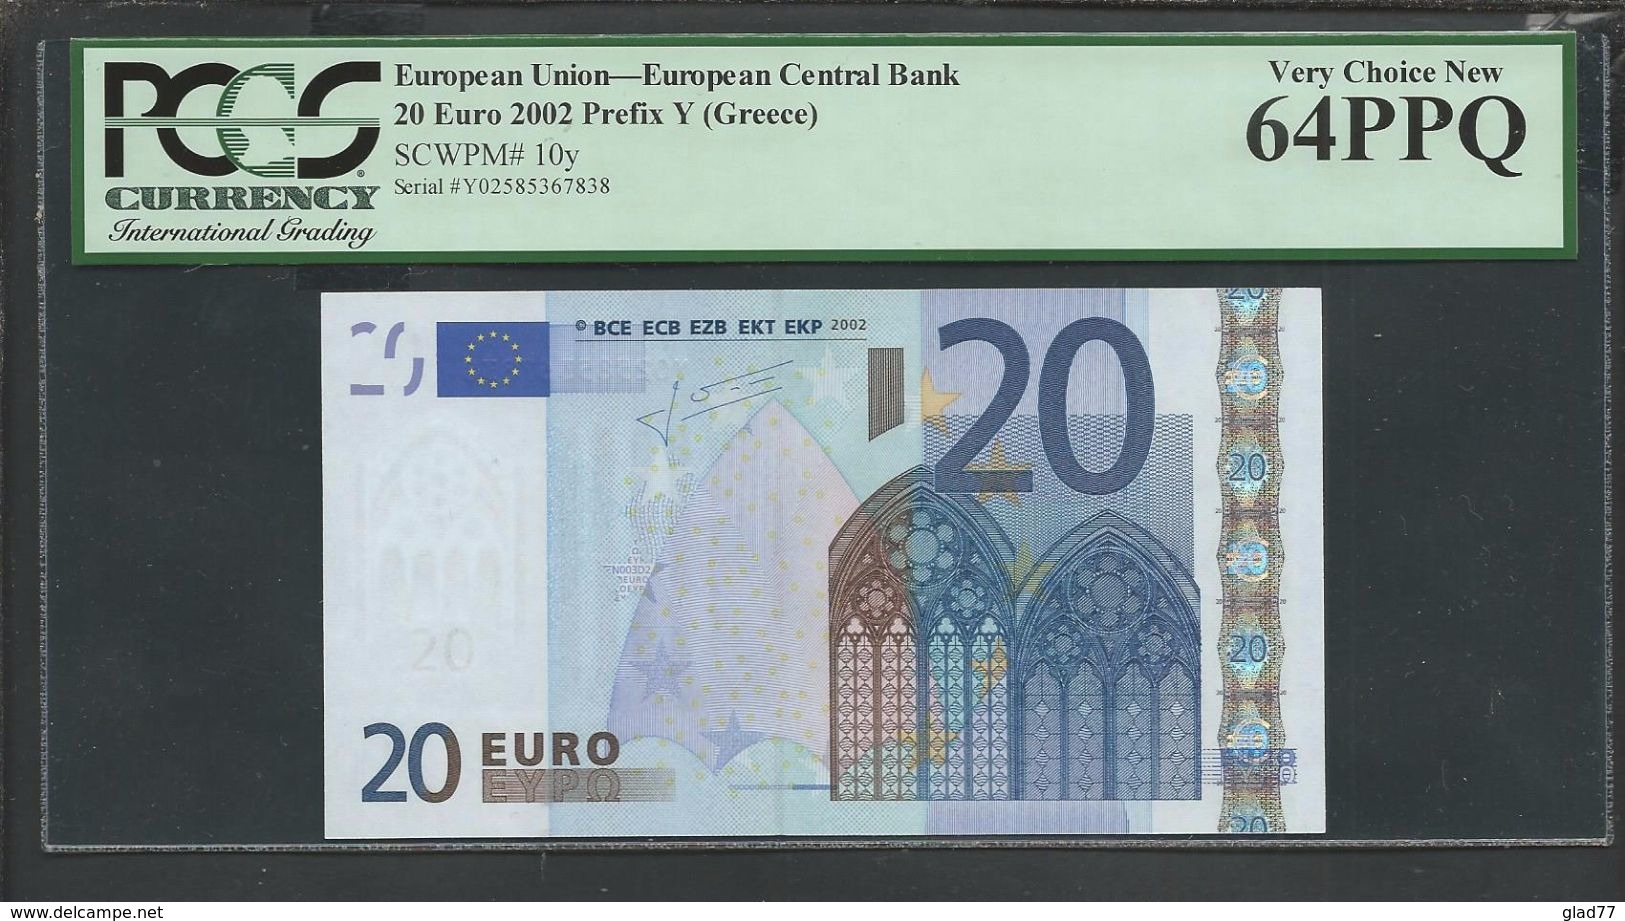 Greece  "Y"  20 EURO PCGS 64 PPQ (Perfect Papere Quality) VERY CHOICE UNC! TRICHET Signature Printer N003D2!! - 20 Euro